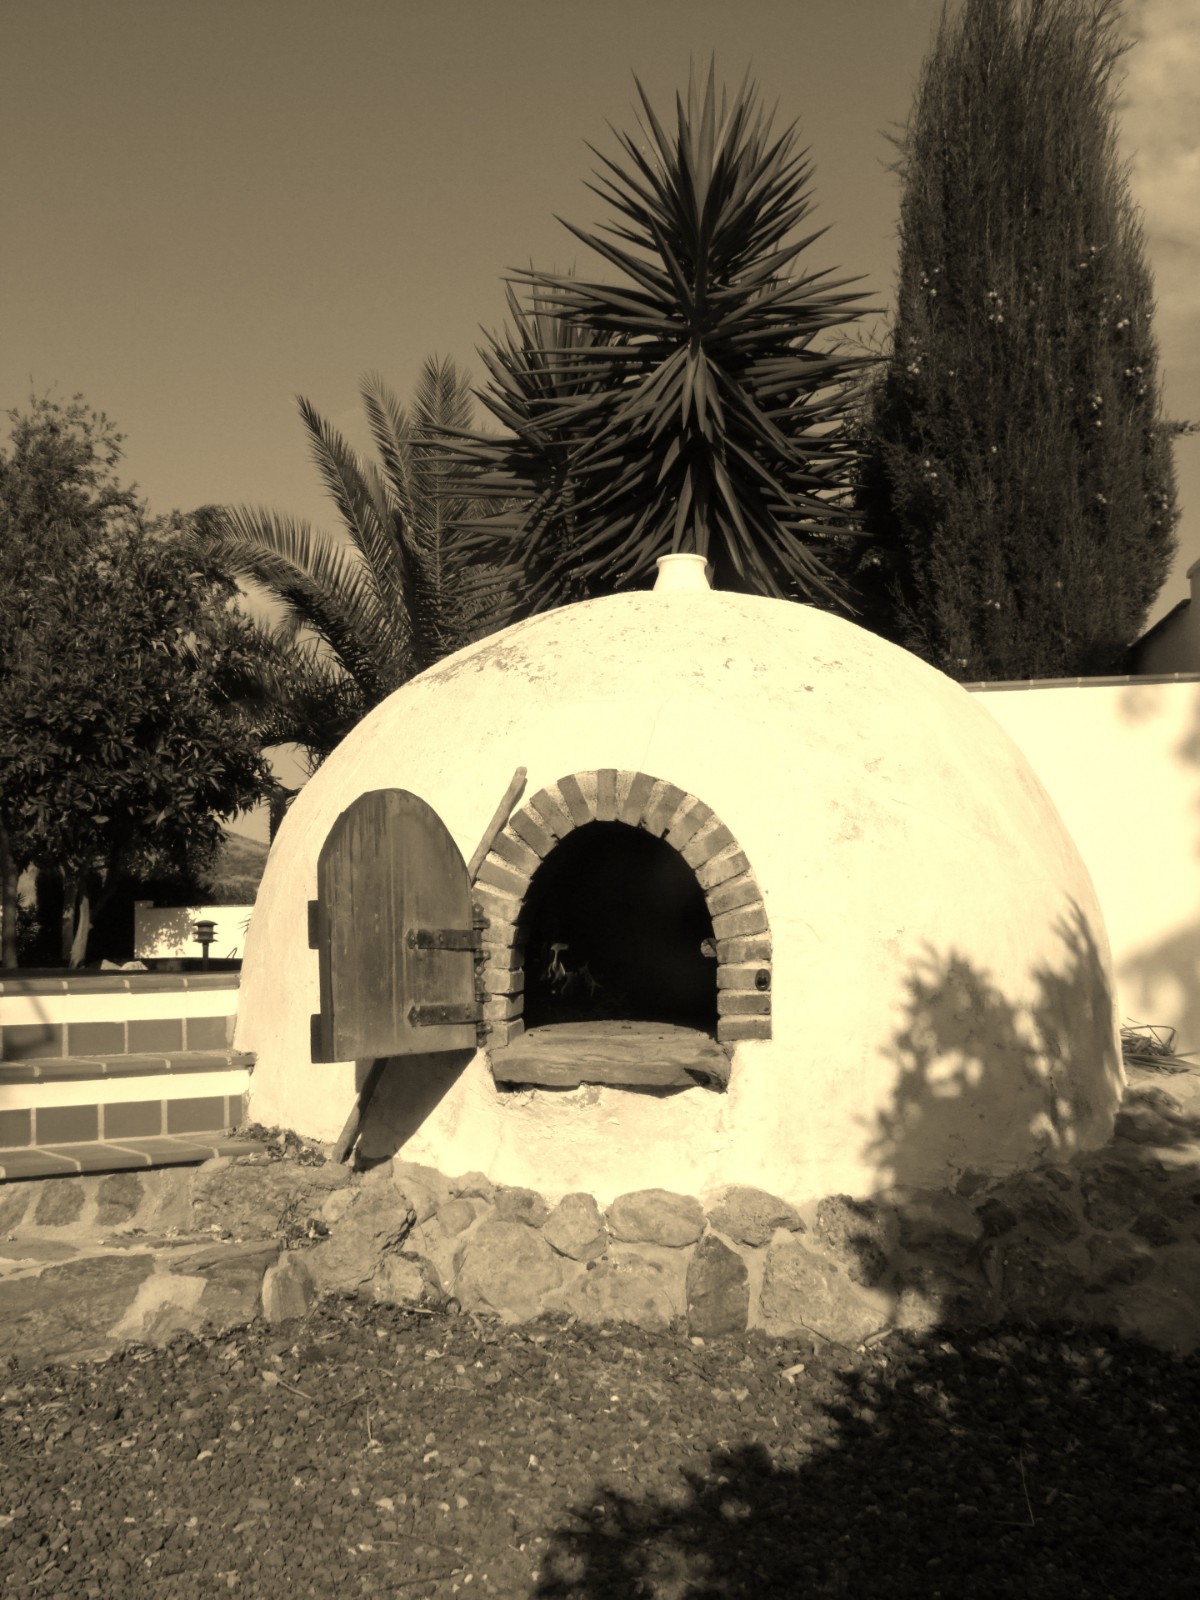 Horno oven, Oven | Stone | Cooking | Spain | Wood | Black | Black and White | Sky | Travel | Al Fresco | Antique